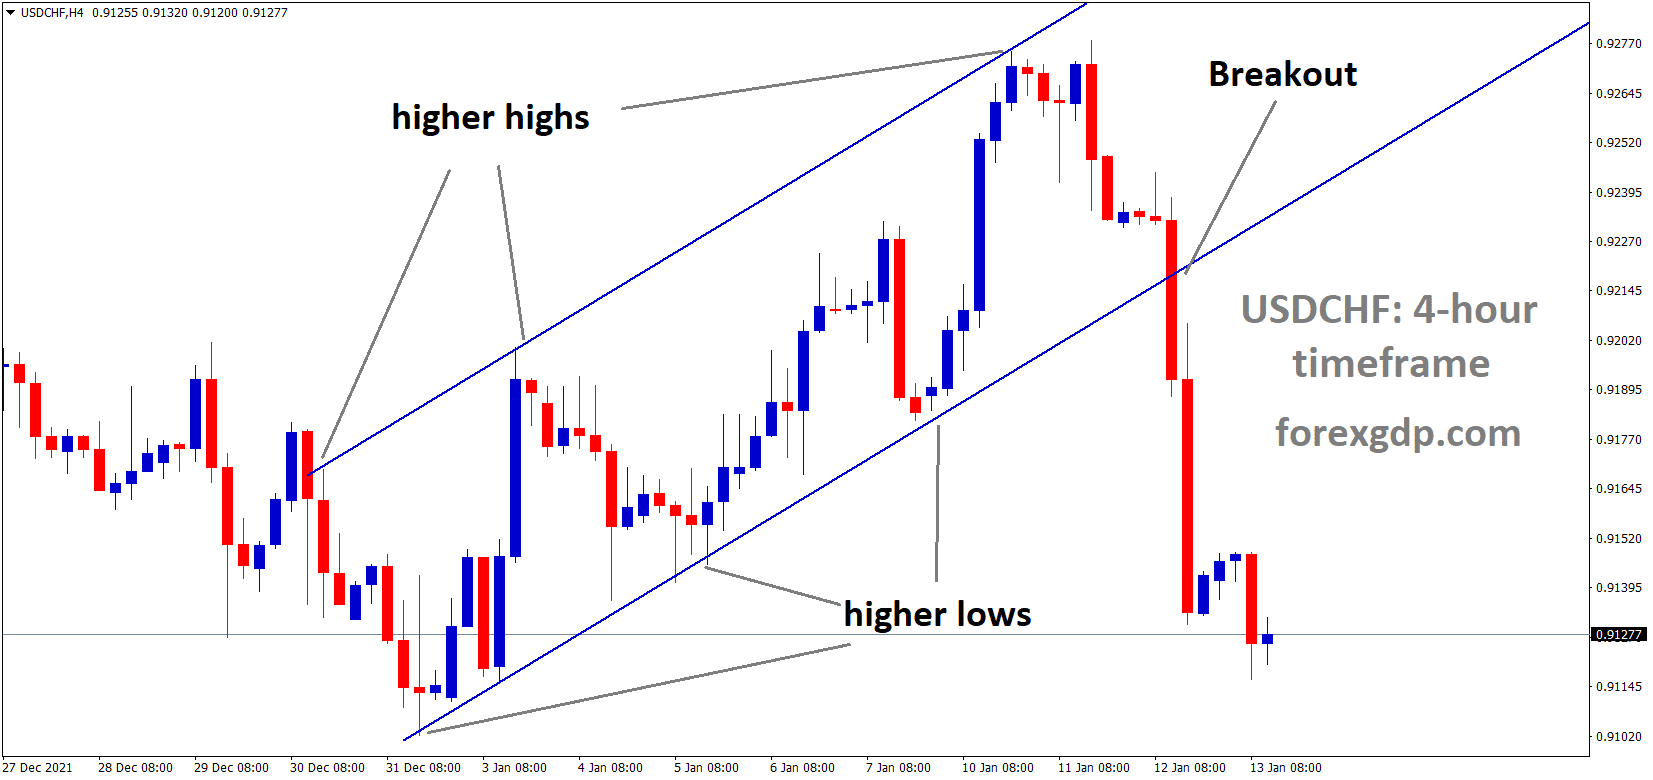 USDCHF has broken the Ascending channel